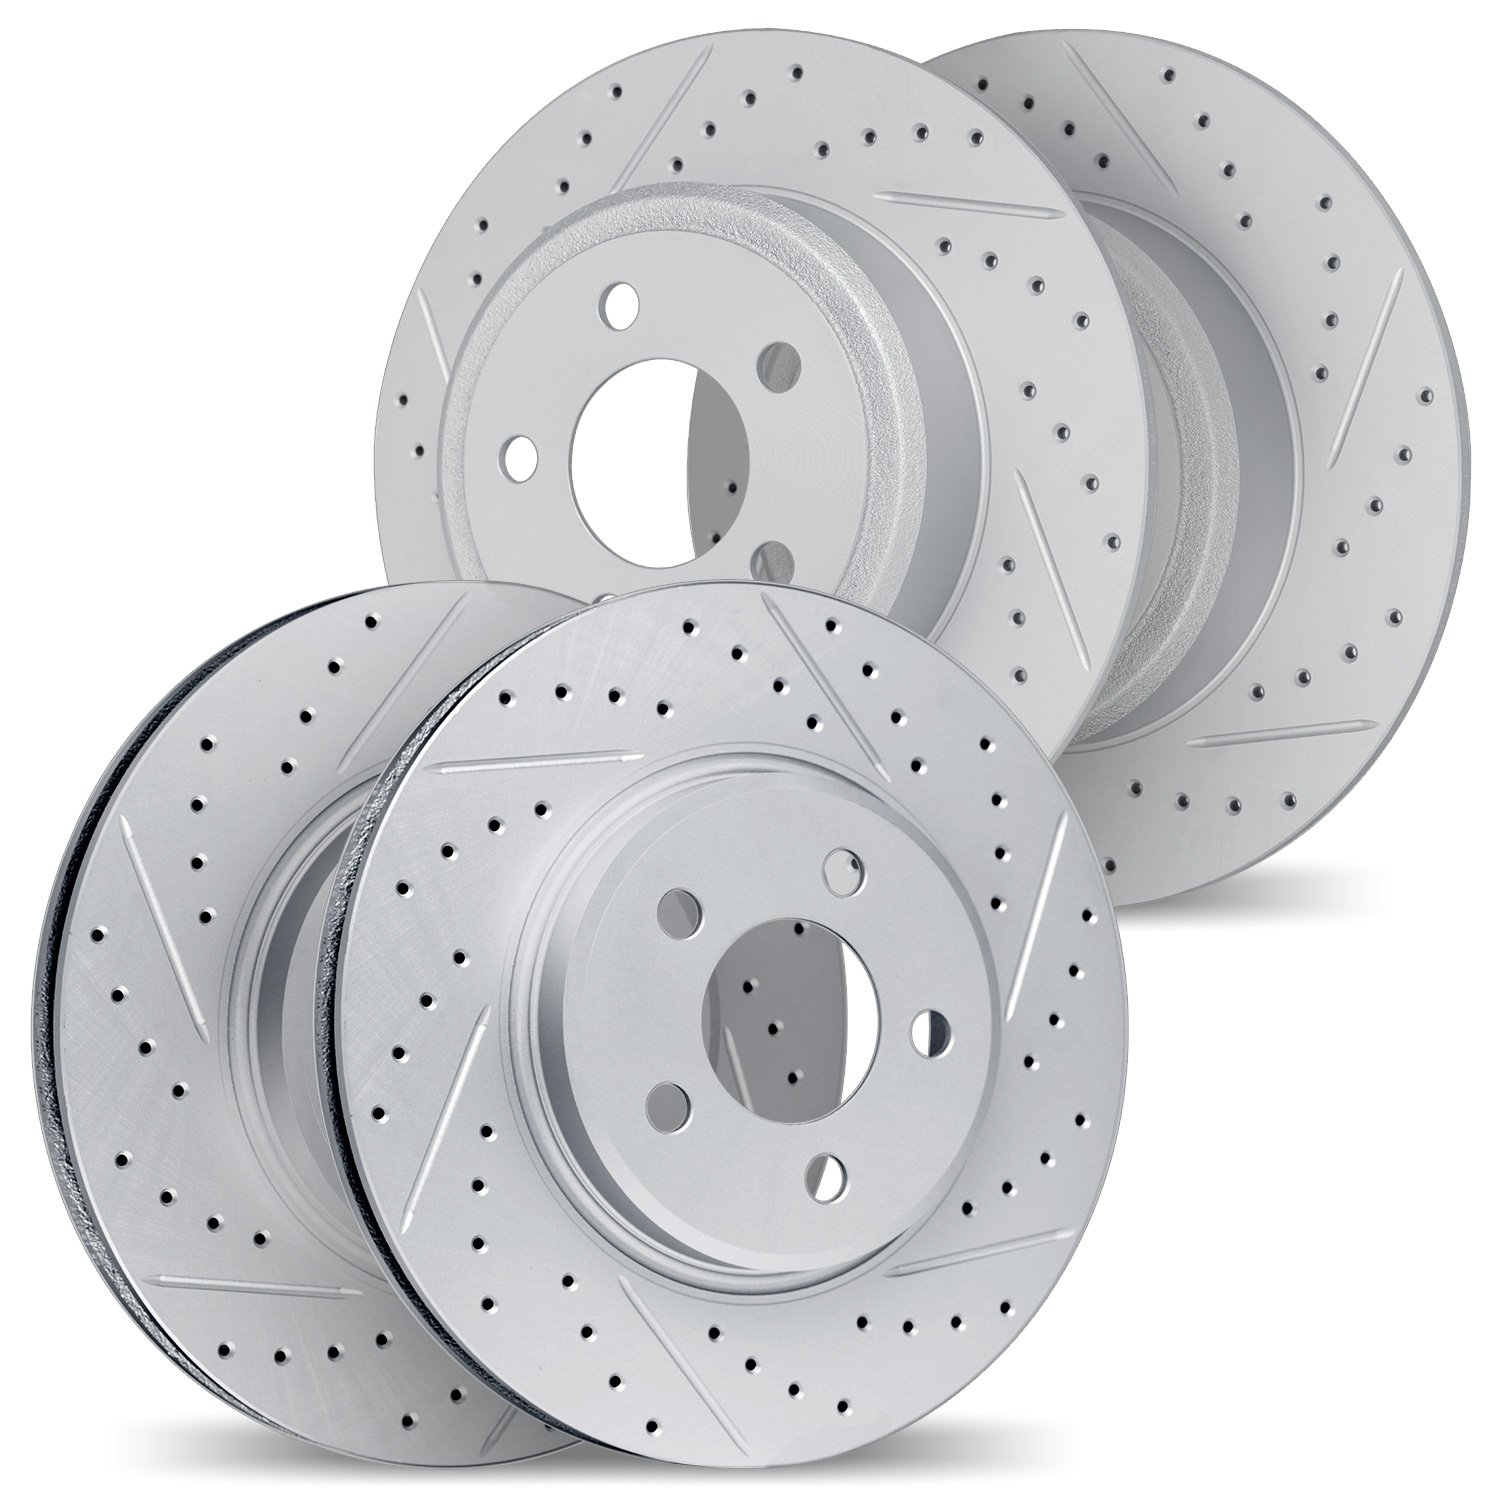 2004-76005 Geoperformance Drilled/Slotted Brake Rotors, 2003-2006 Lexus/Toyota/Scion, Position: Front and Rear